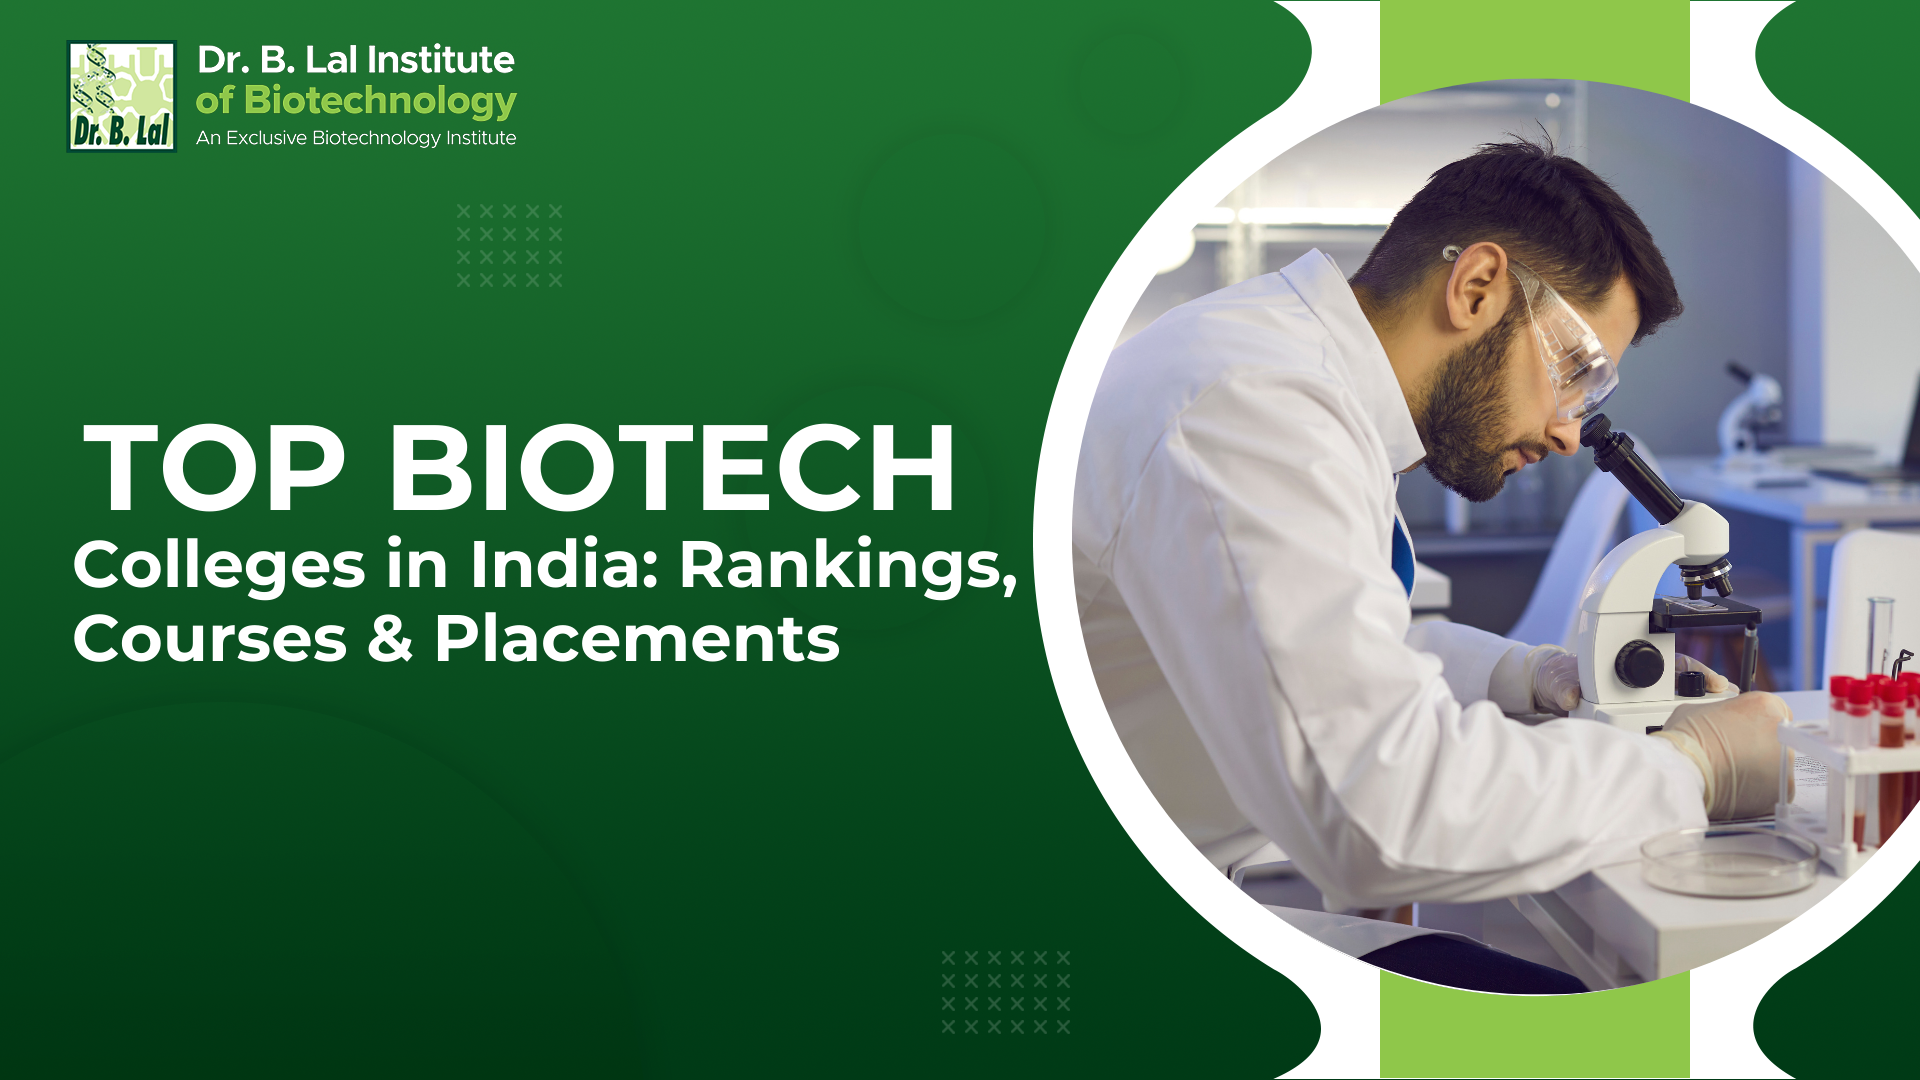 Top Biotech College in India: Rankings, Courses & Placements